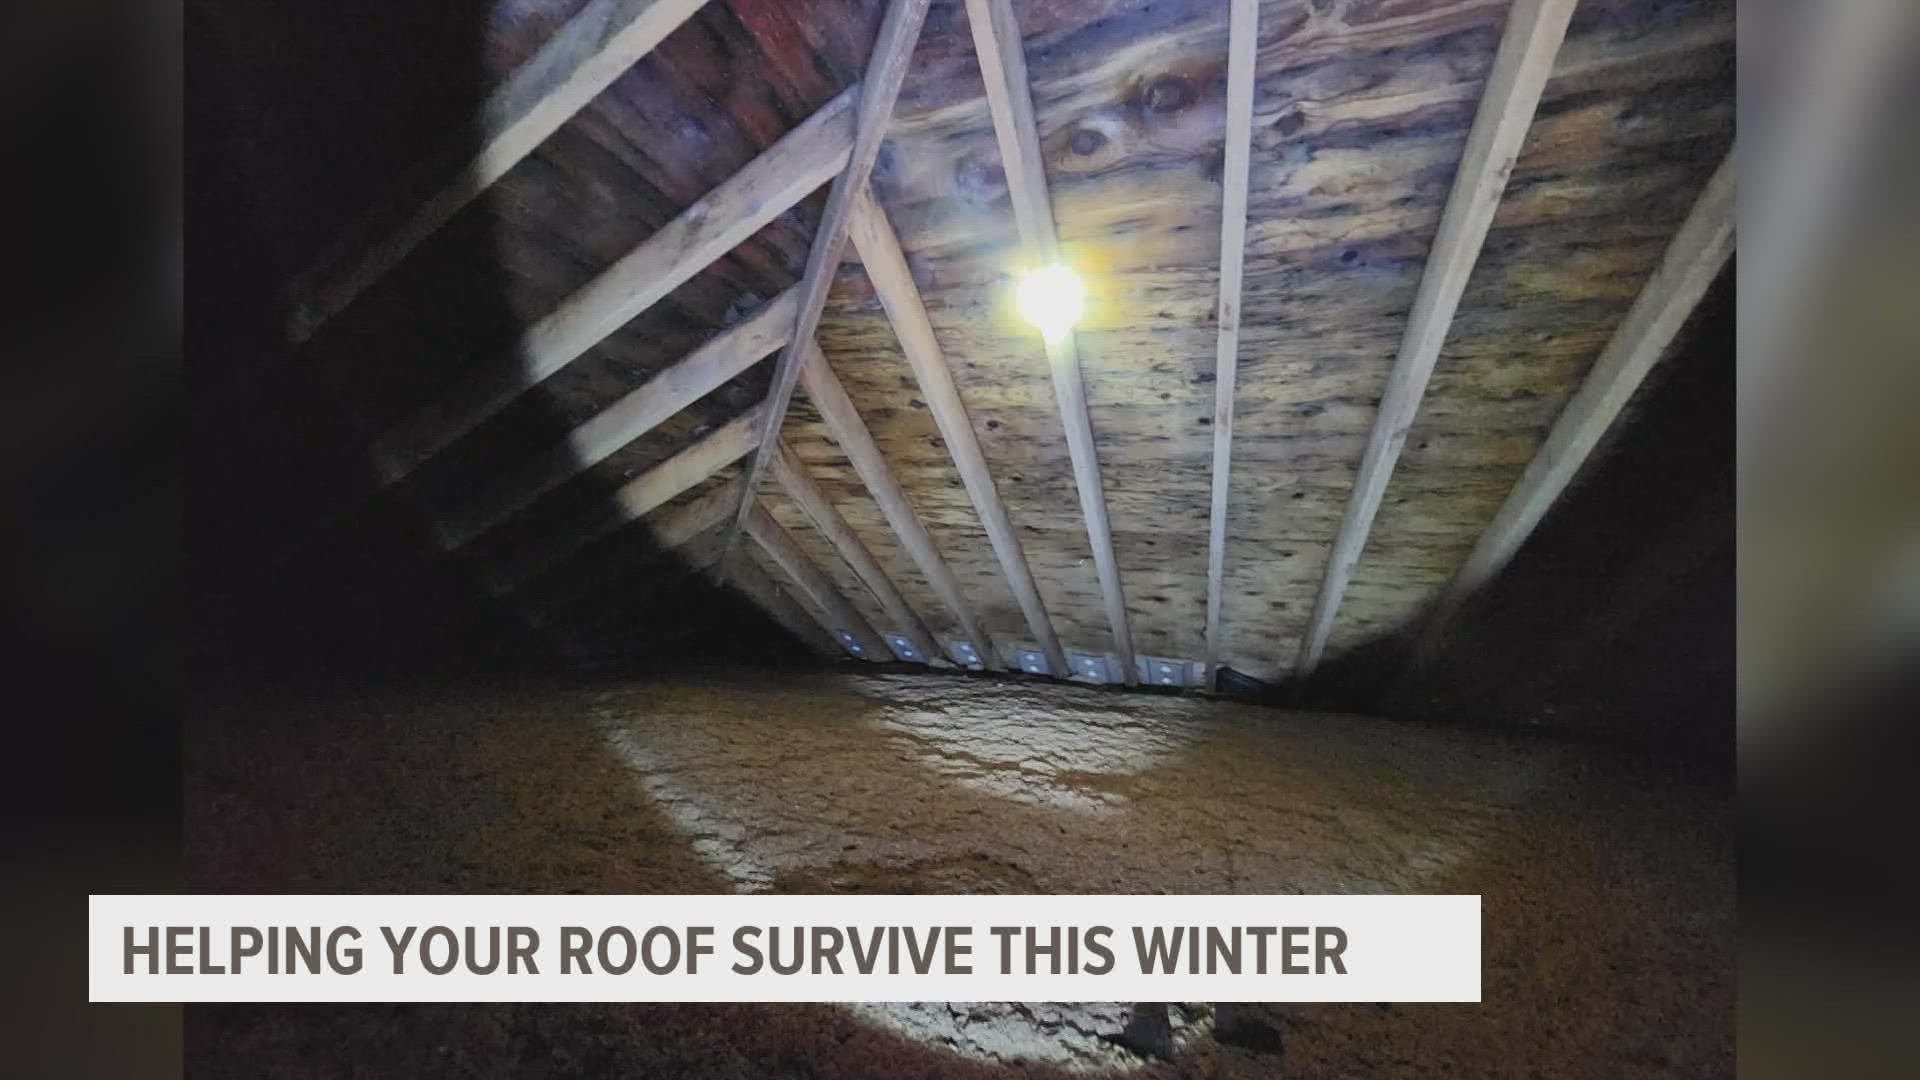 From ice jams to moisture buildup in attics, Jared Harrison with R3 Roofing and Exteriors has had calls for just about everything so far this winter.